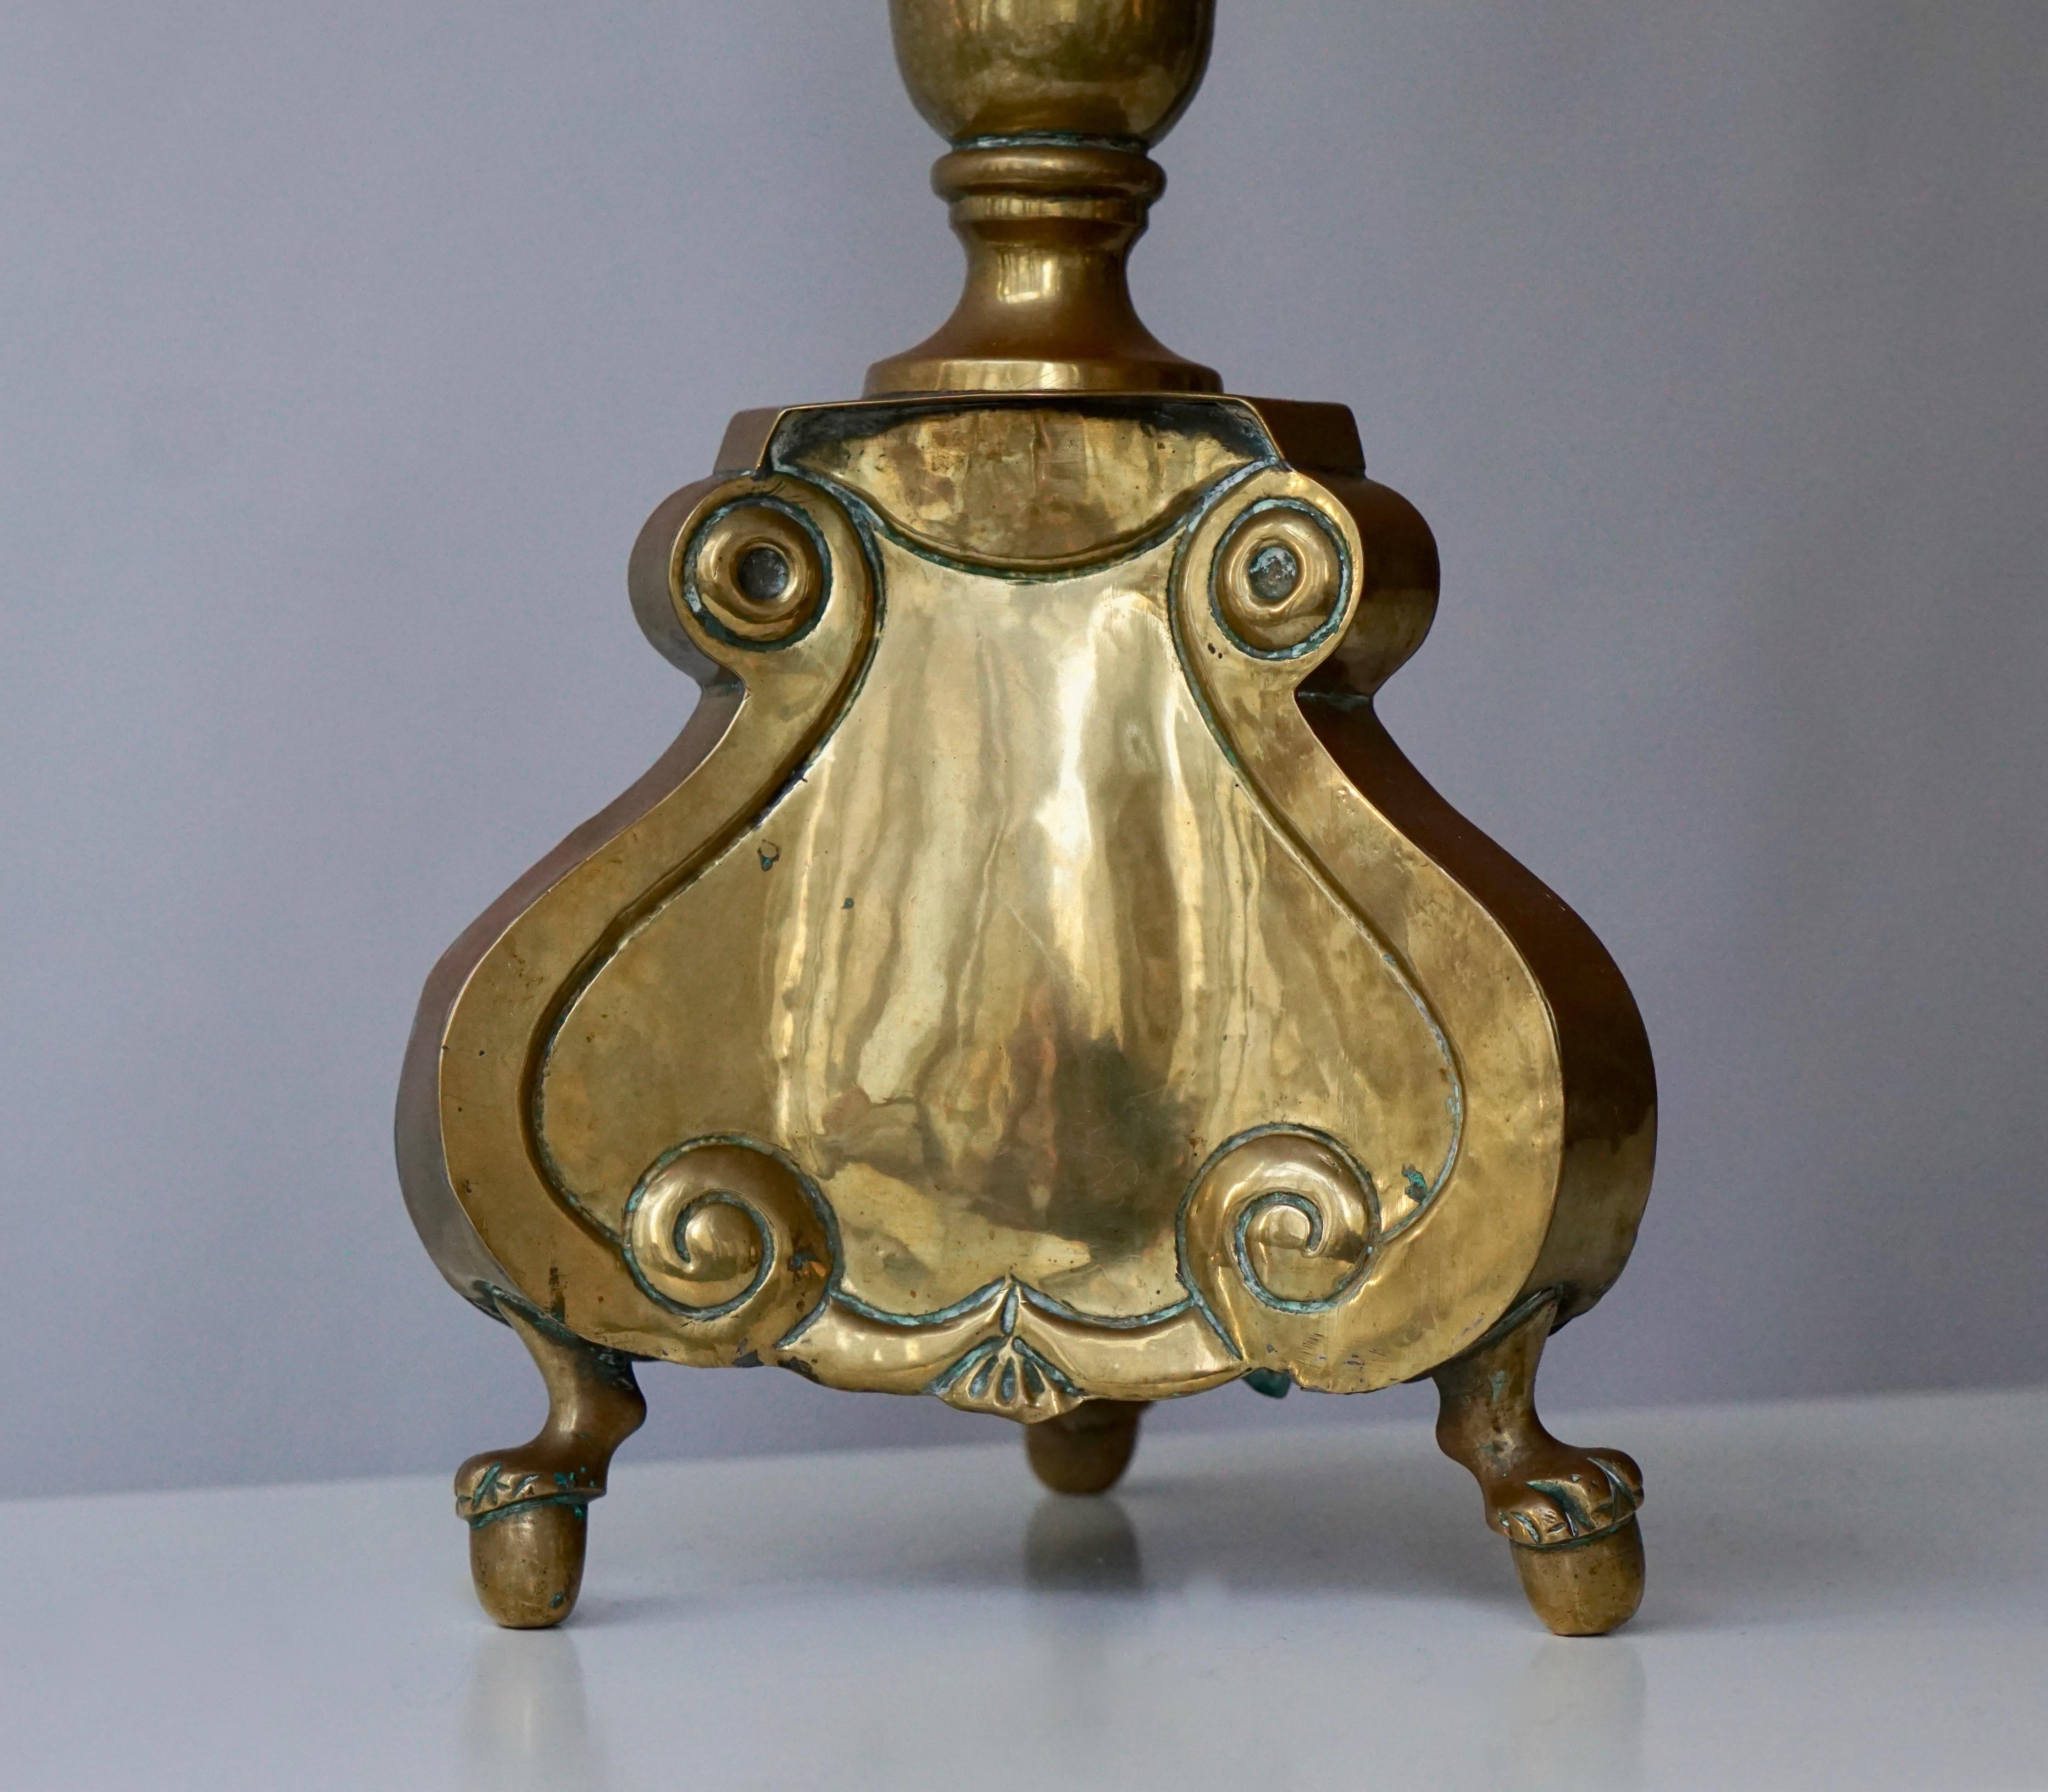 Polished Brass Tall Torchere, Candlestick or Prickets, 19th Century For Sale 3